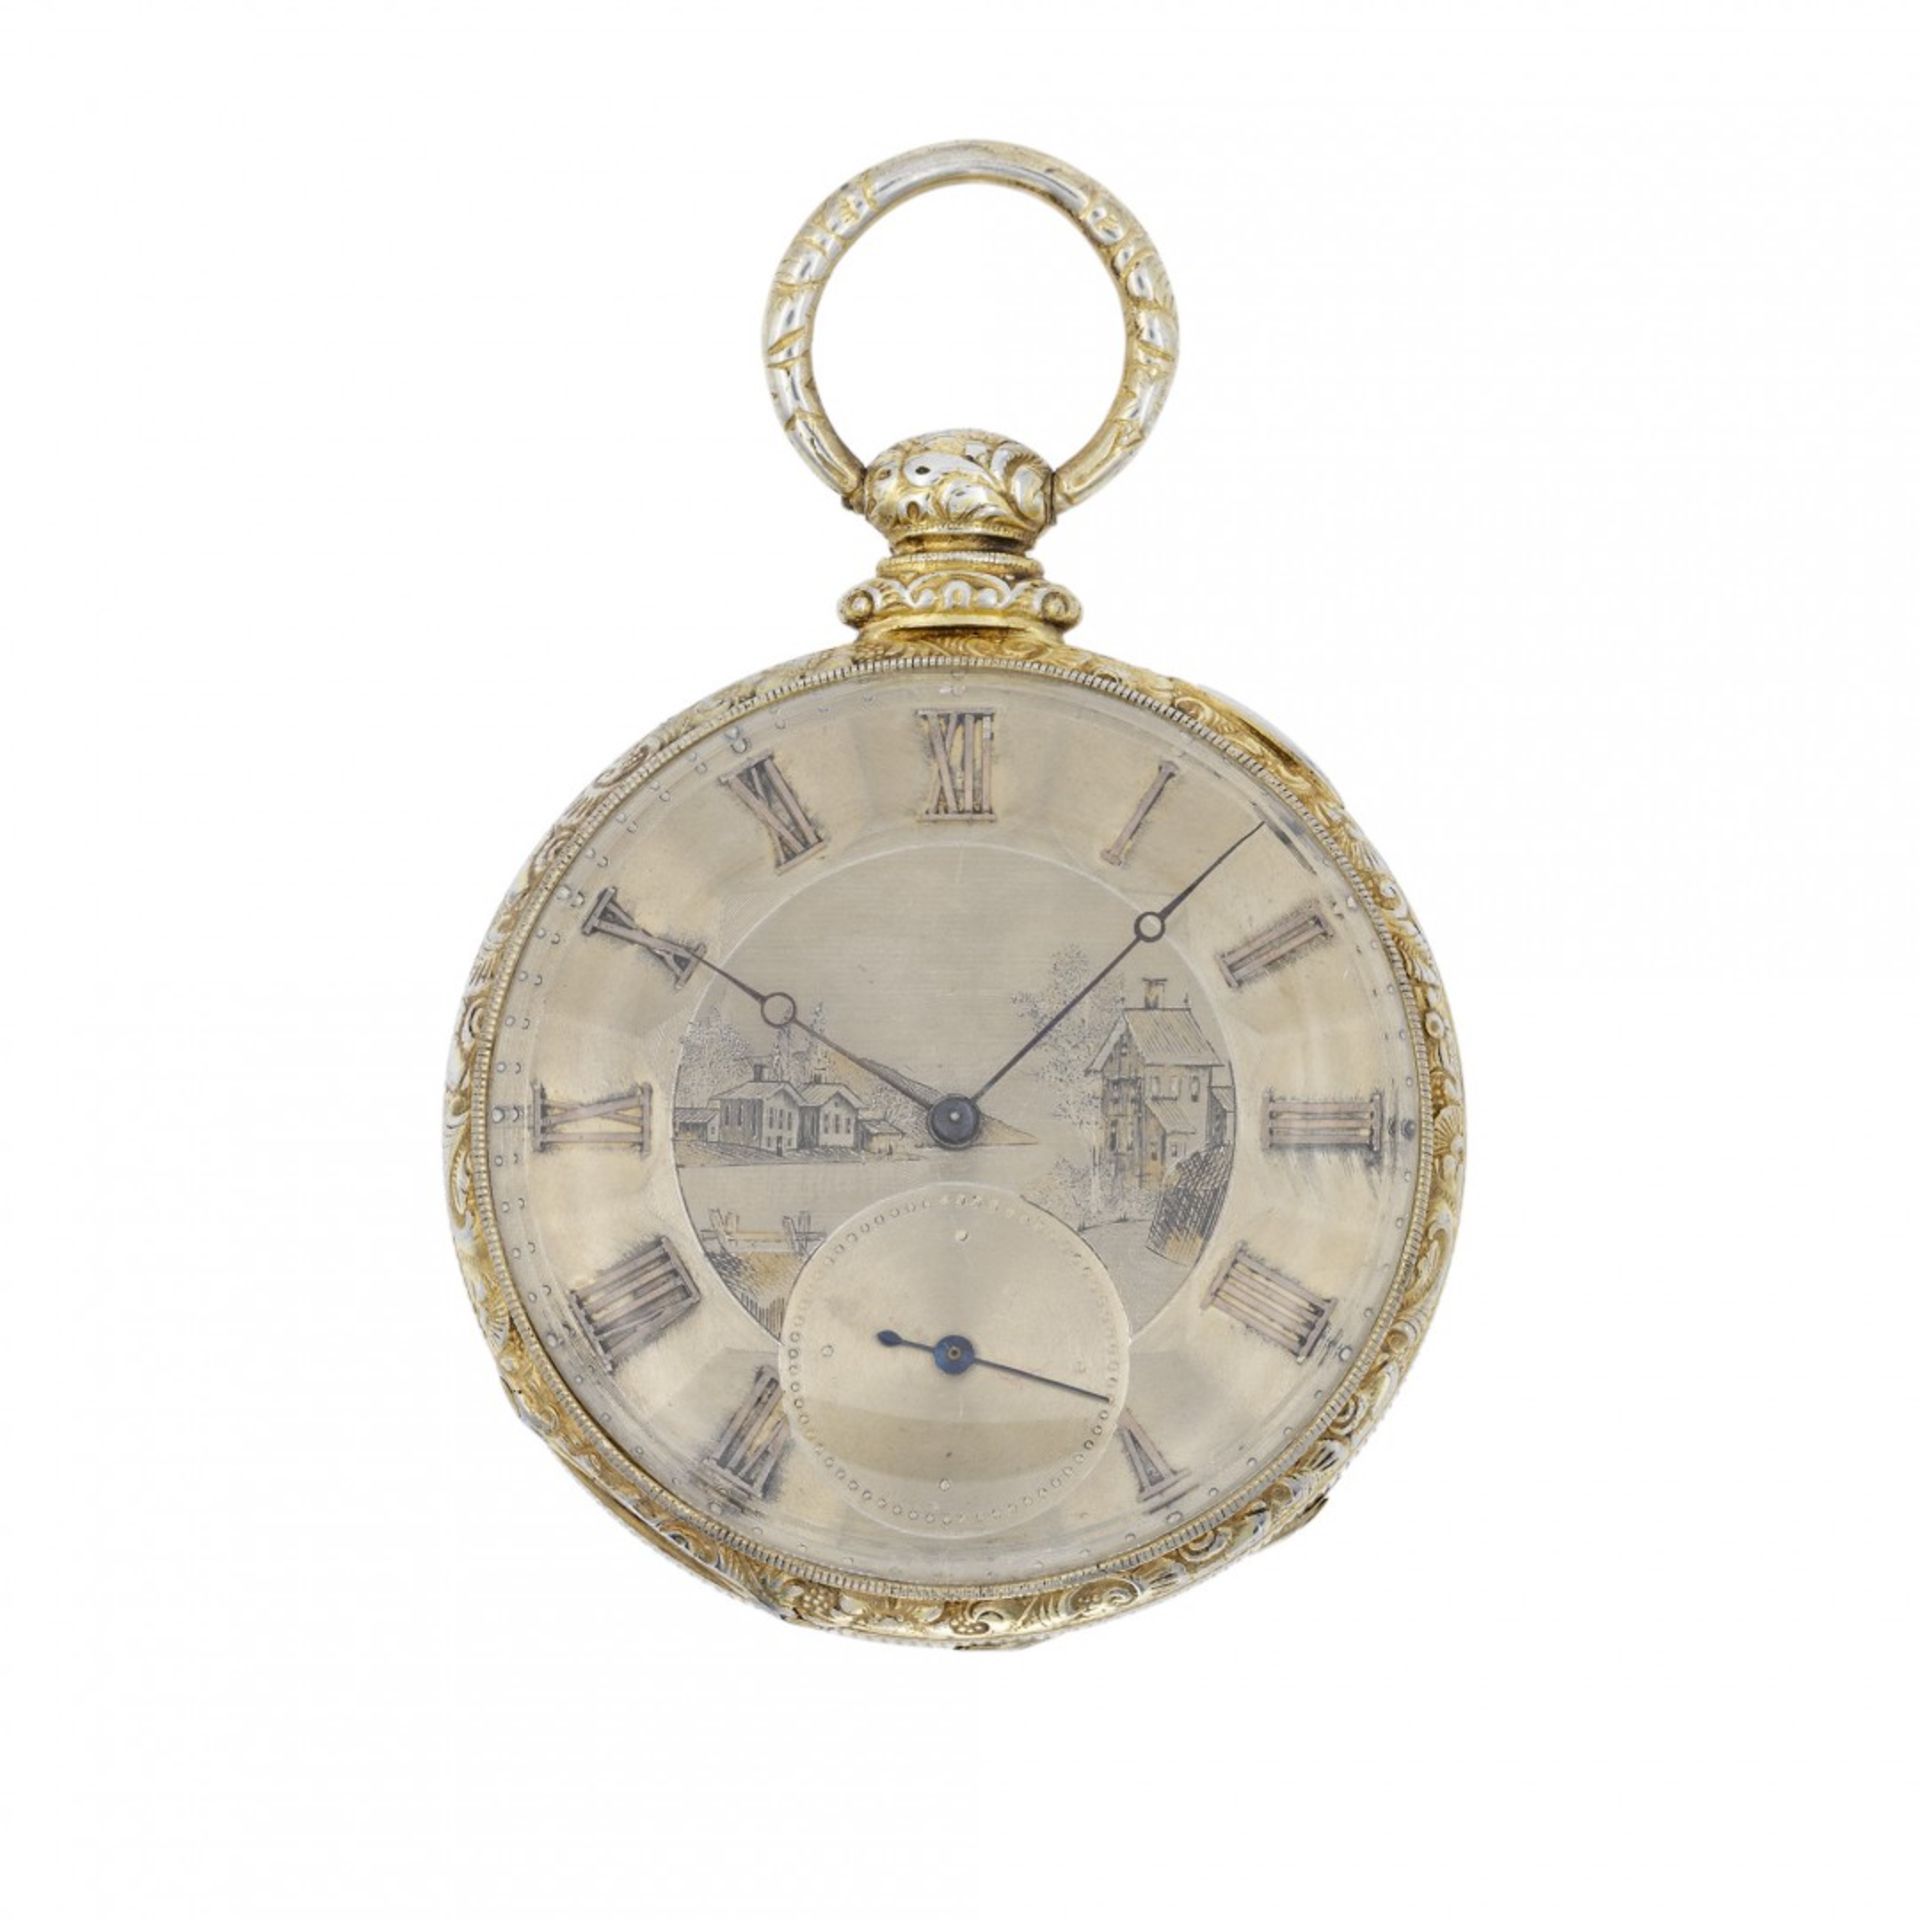 VERMEIL AND ENGRAVED WATCH SIGNED DECHOUDENS, CIRCA 1860